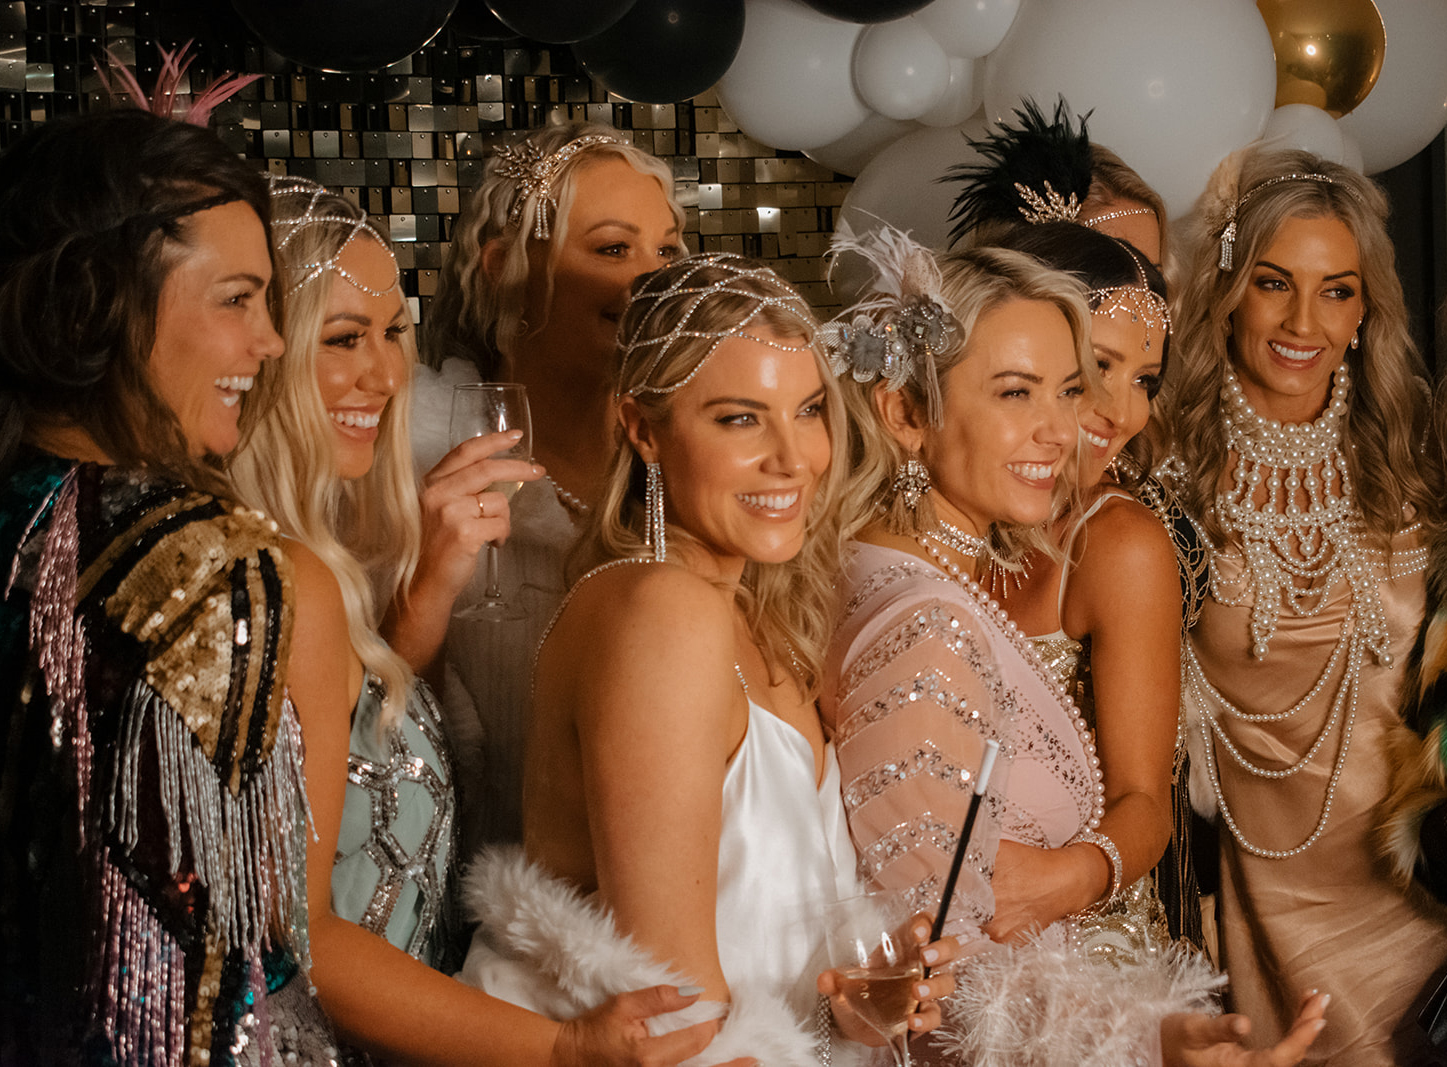 Profile group photo of 8 attractive women in Gatsby themed dresses